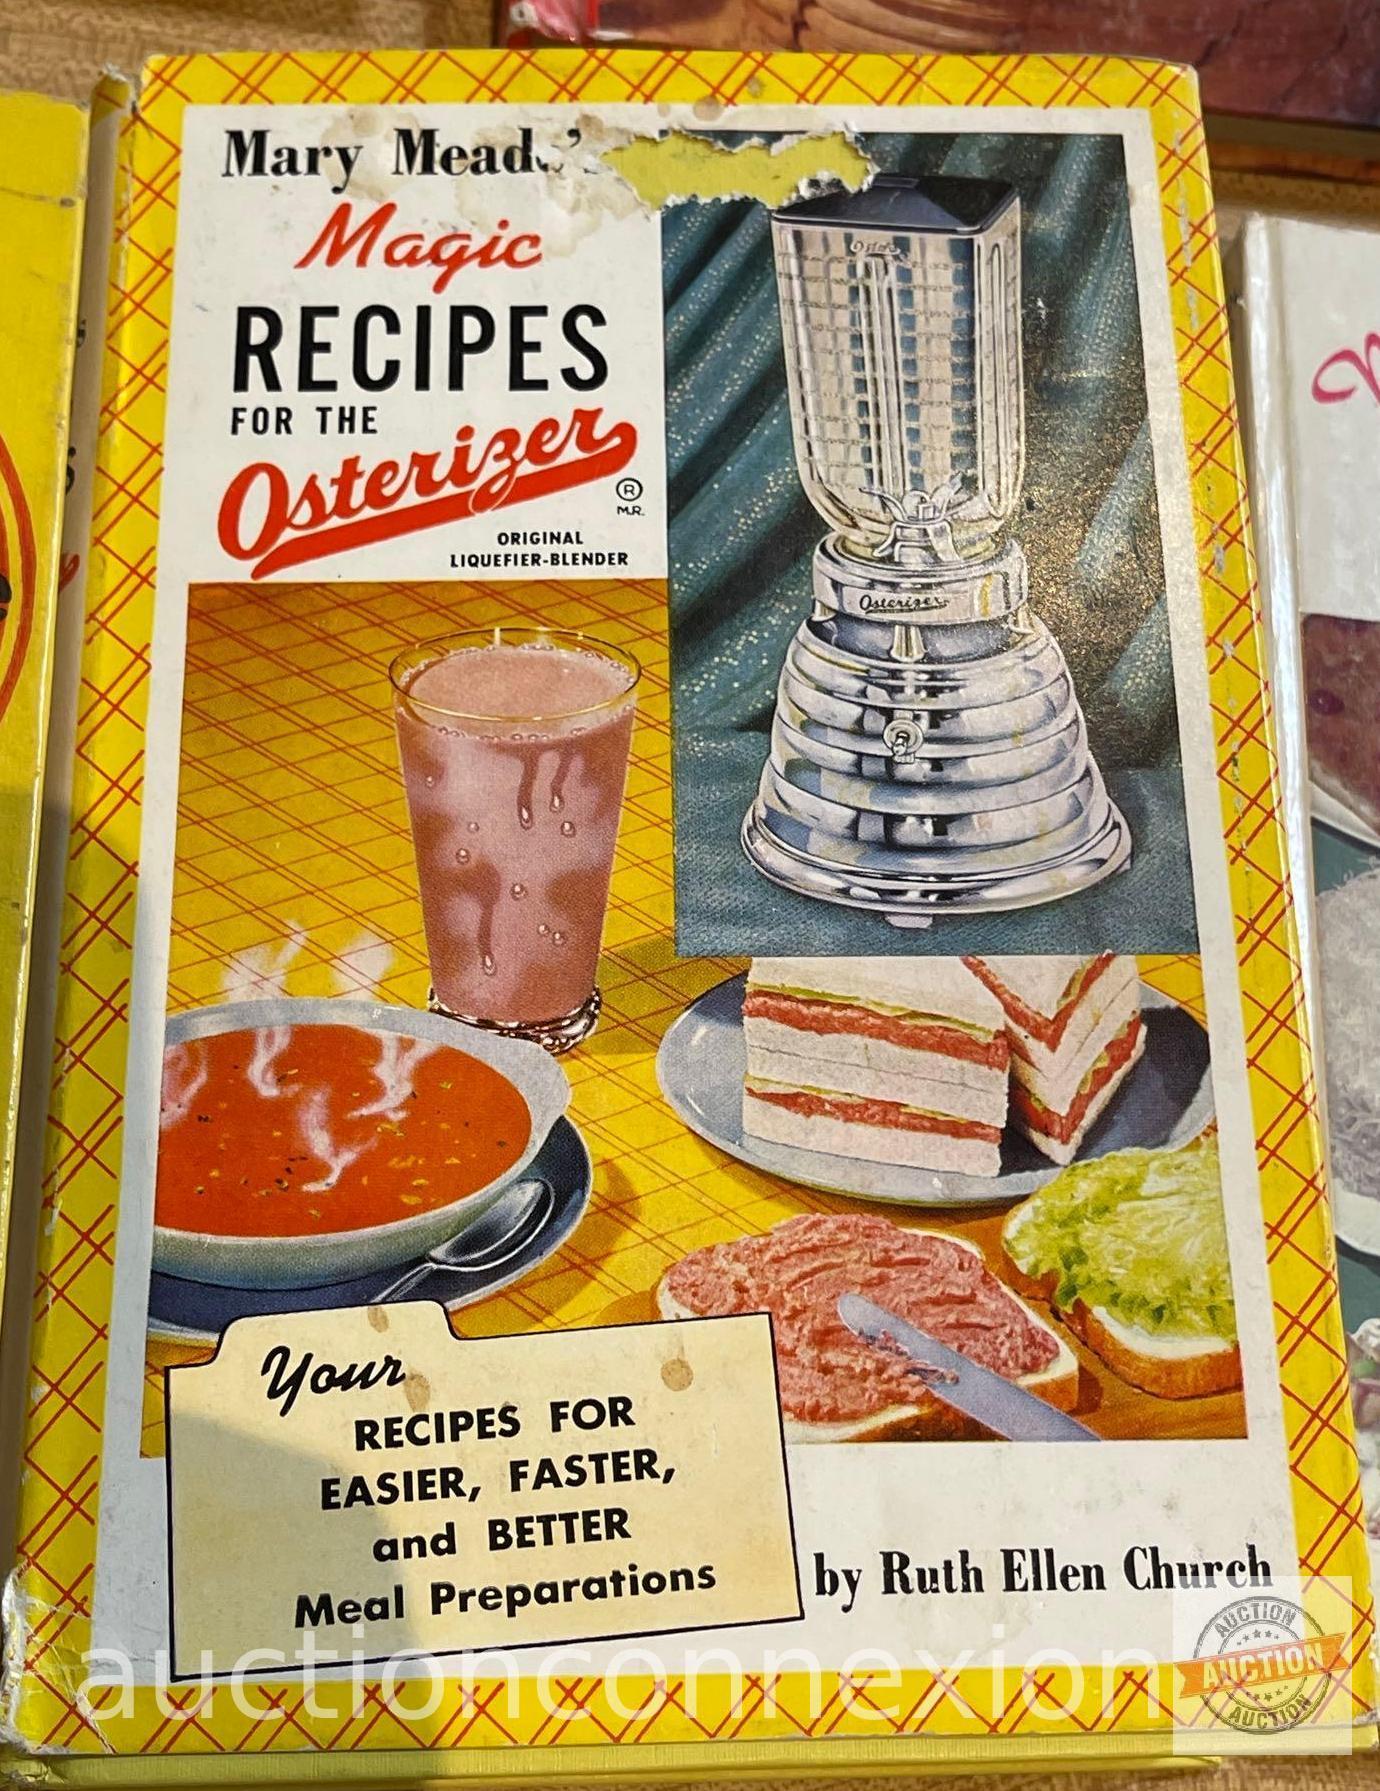 Books - Vintage Cookbooks - 9 from the 1950's-1960's